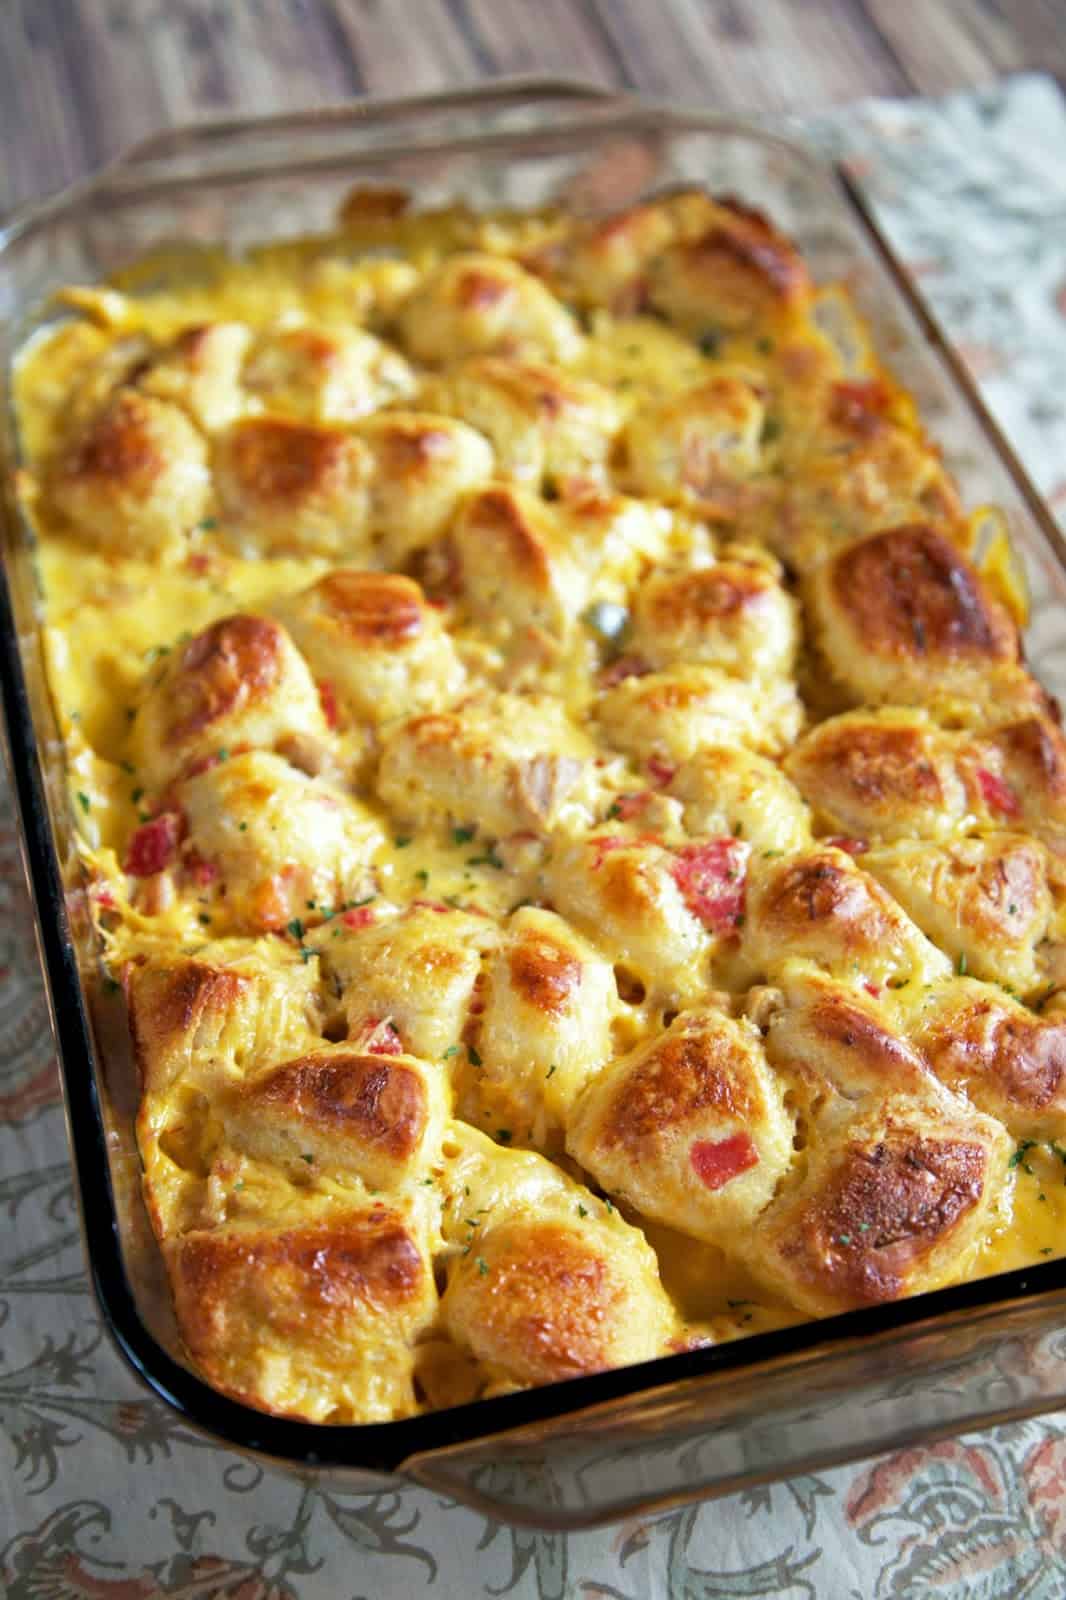 King Ranch Bubble Up Recipe - chicken, Velveeta cheese, Rotel, chicken soup tossed with chopped refrigerated biscuits and baked - use mild rotel if worried about the heat. OMG! SO easy and SO delicious! I wanted to lick my plate!